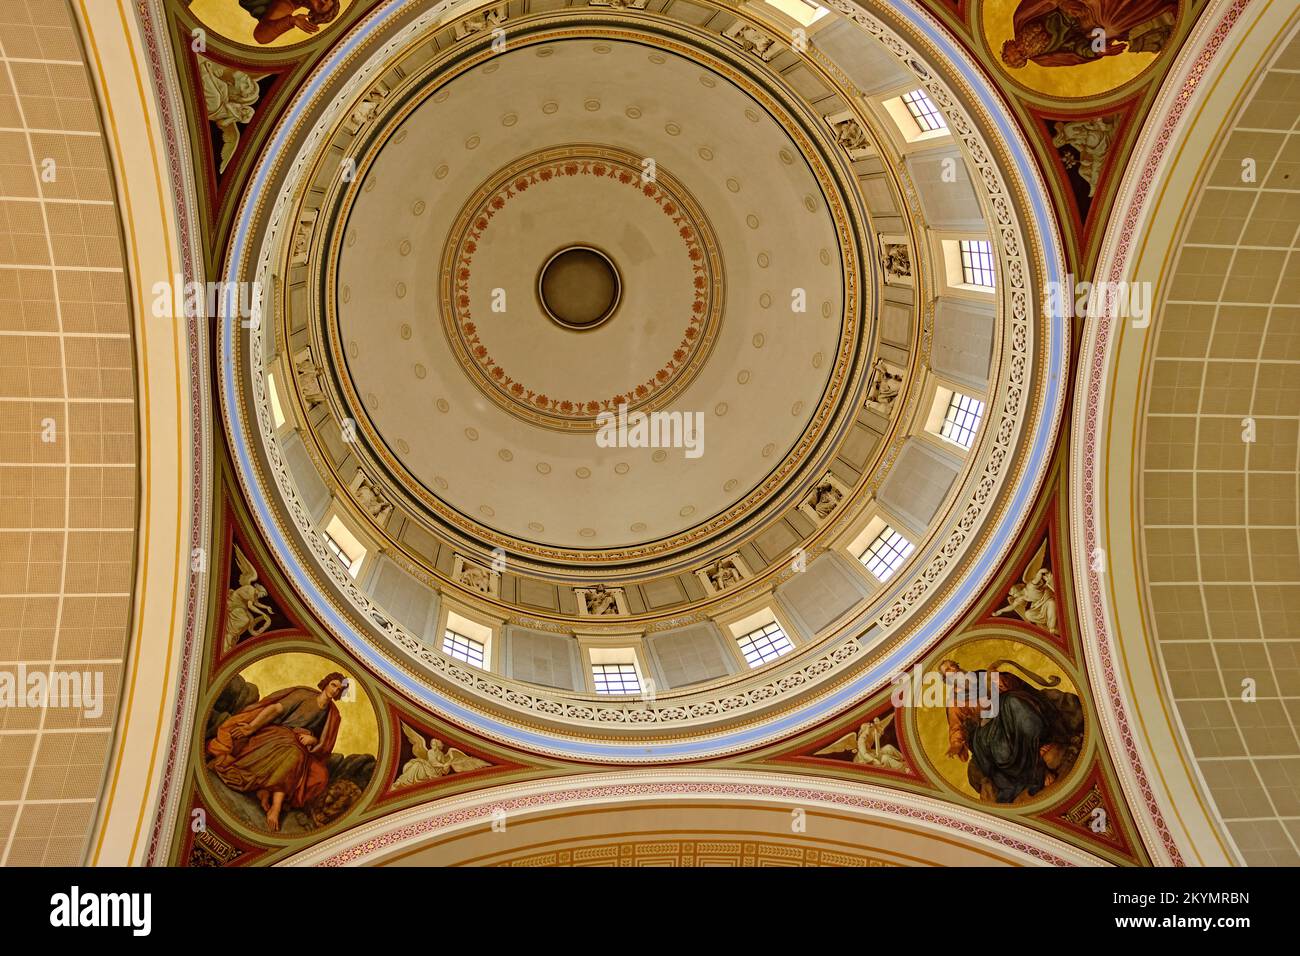 View into the dome of the Church of St. Nicholas on the Old Market Square, Potsdam, Brandenburg, Germany. Stock Photo